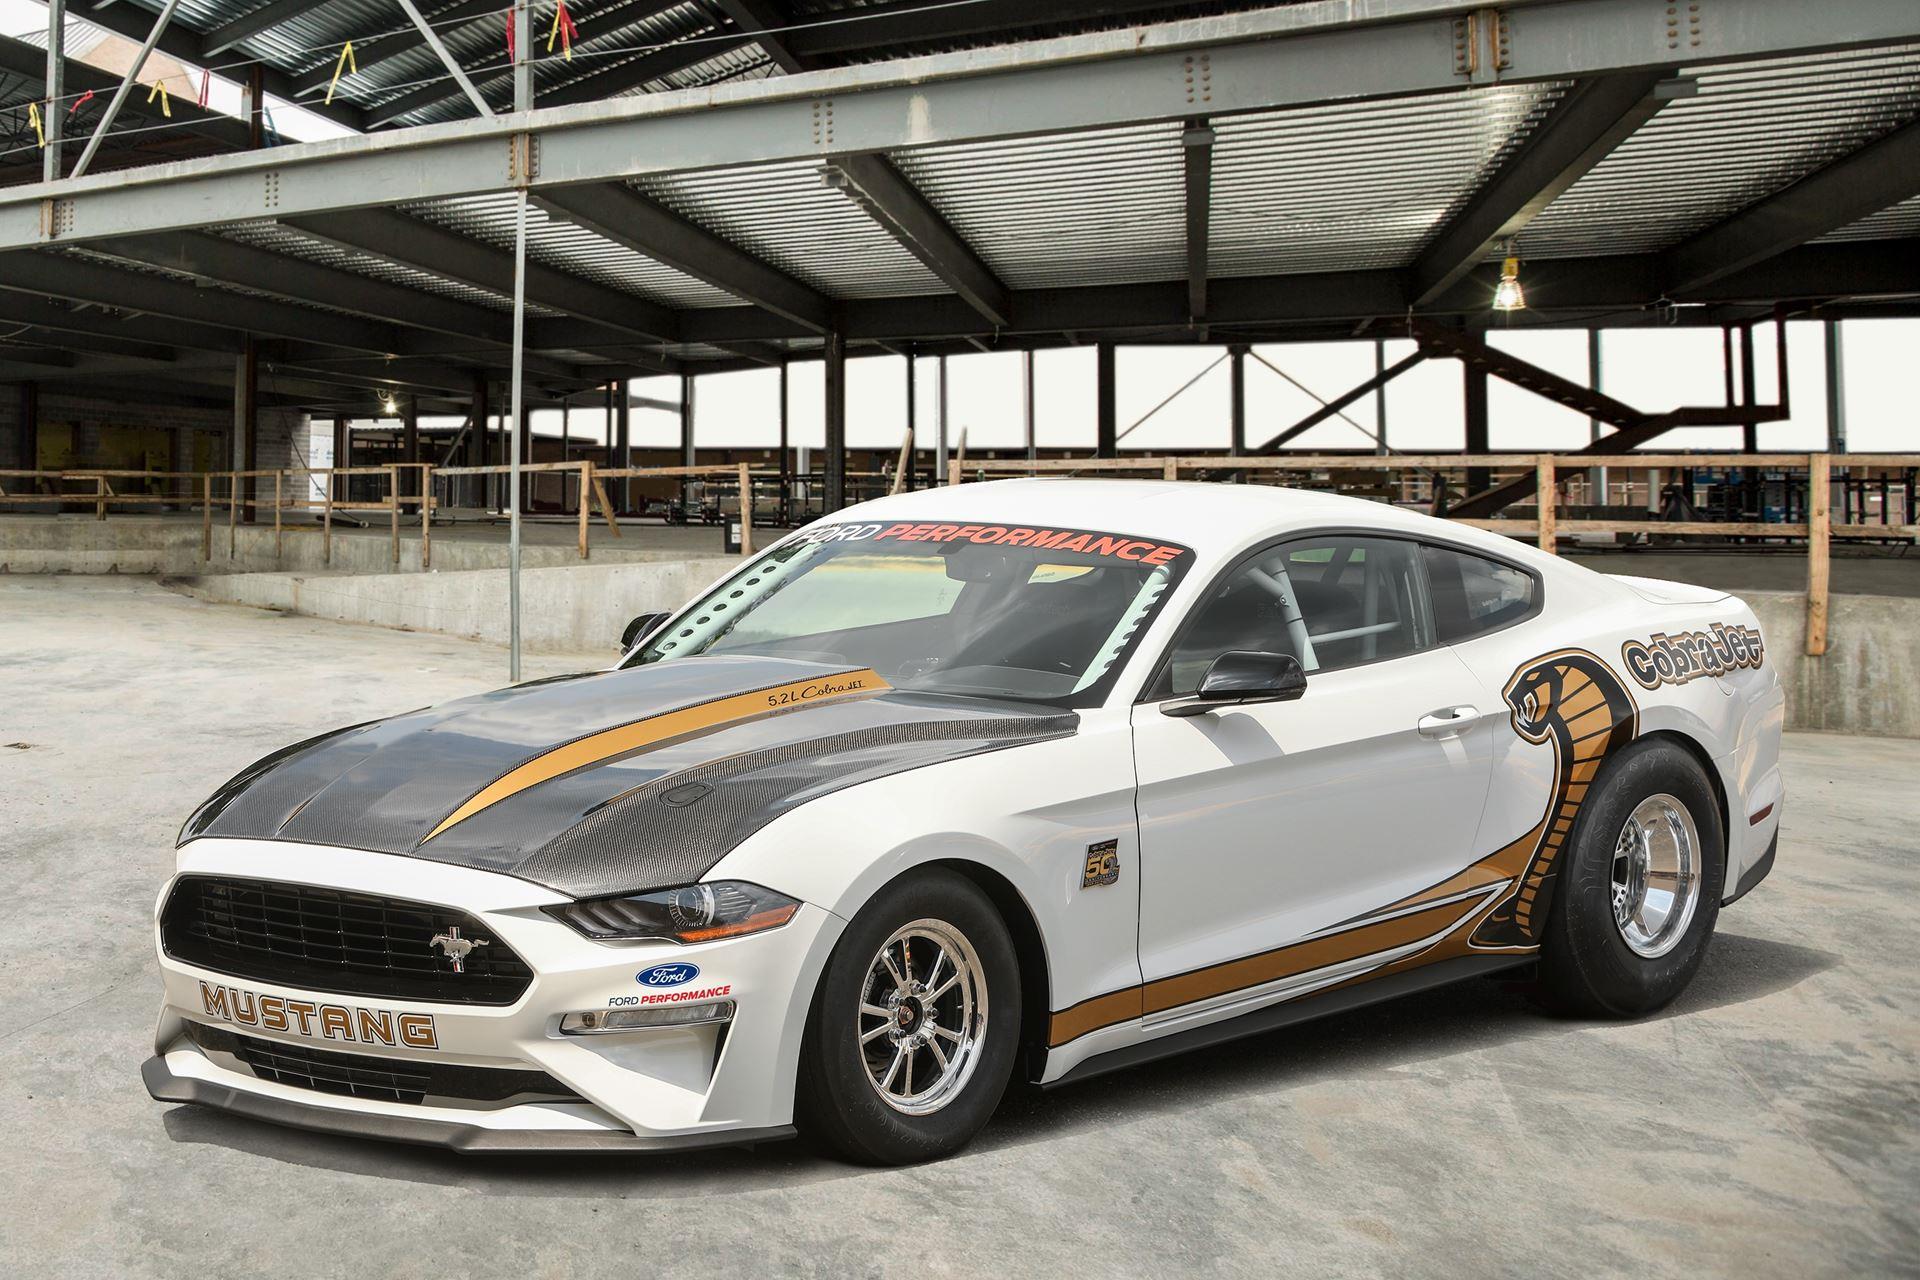 Ford Mustang Cobra Jet 1400 Concept Wallpapers